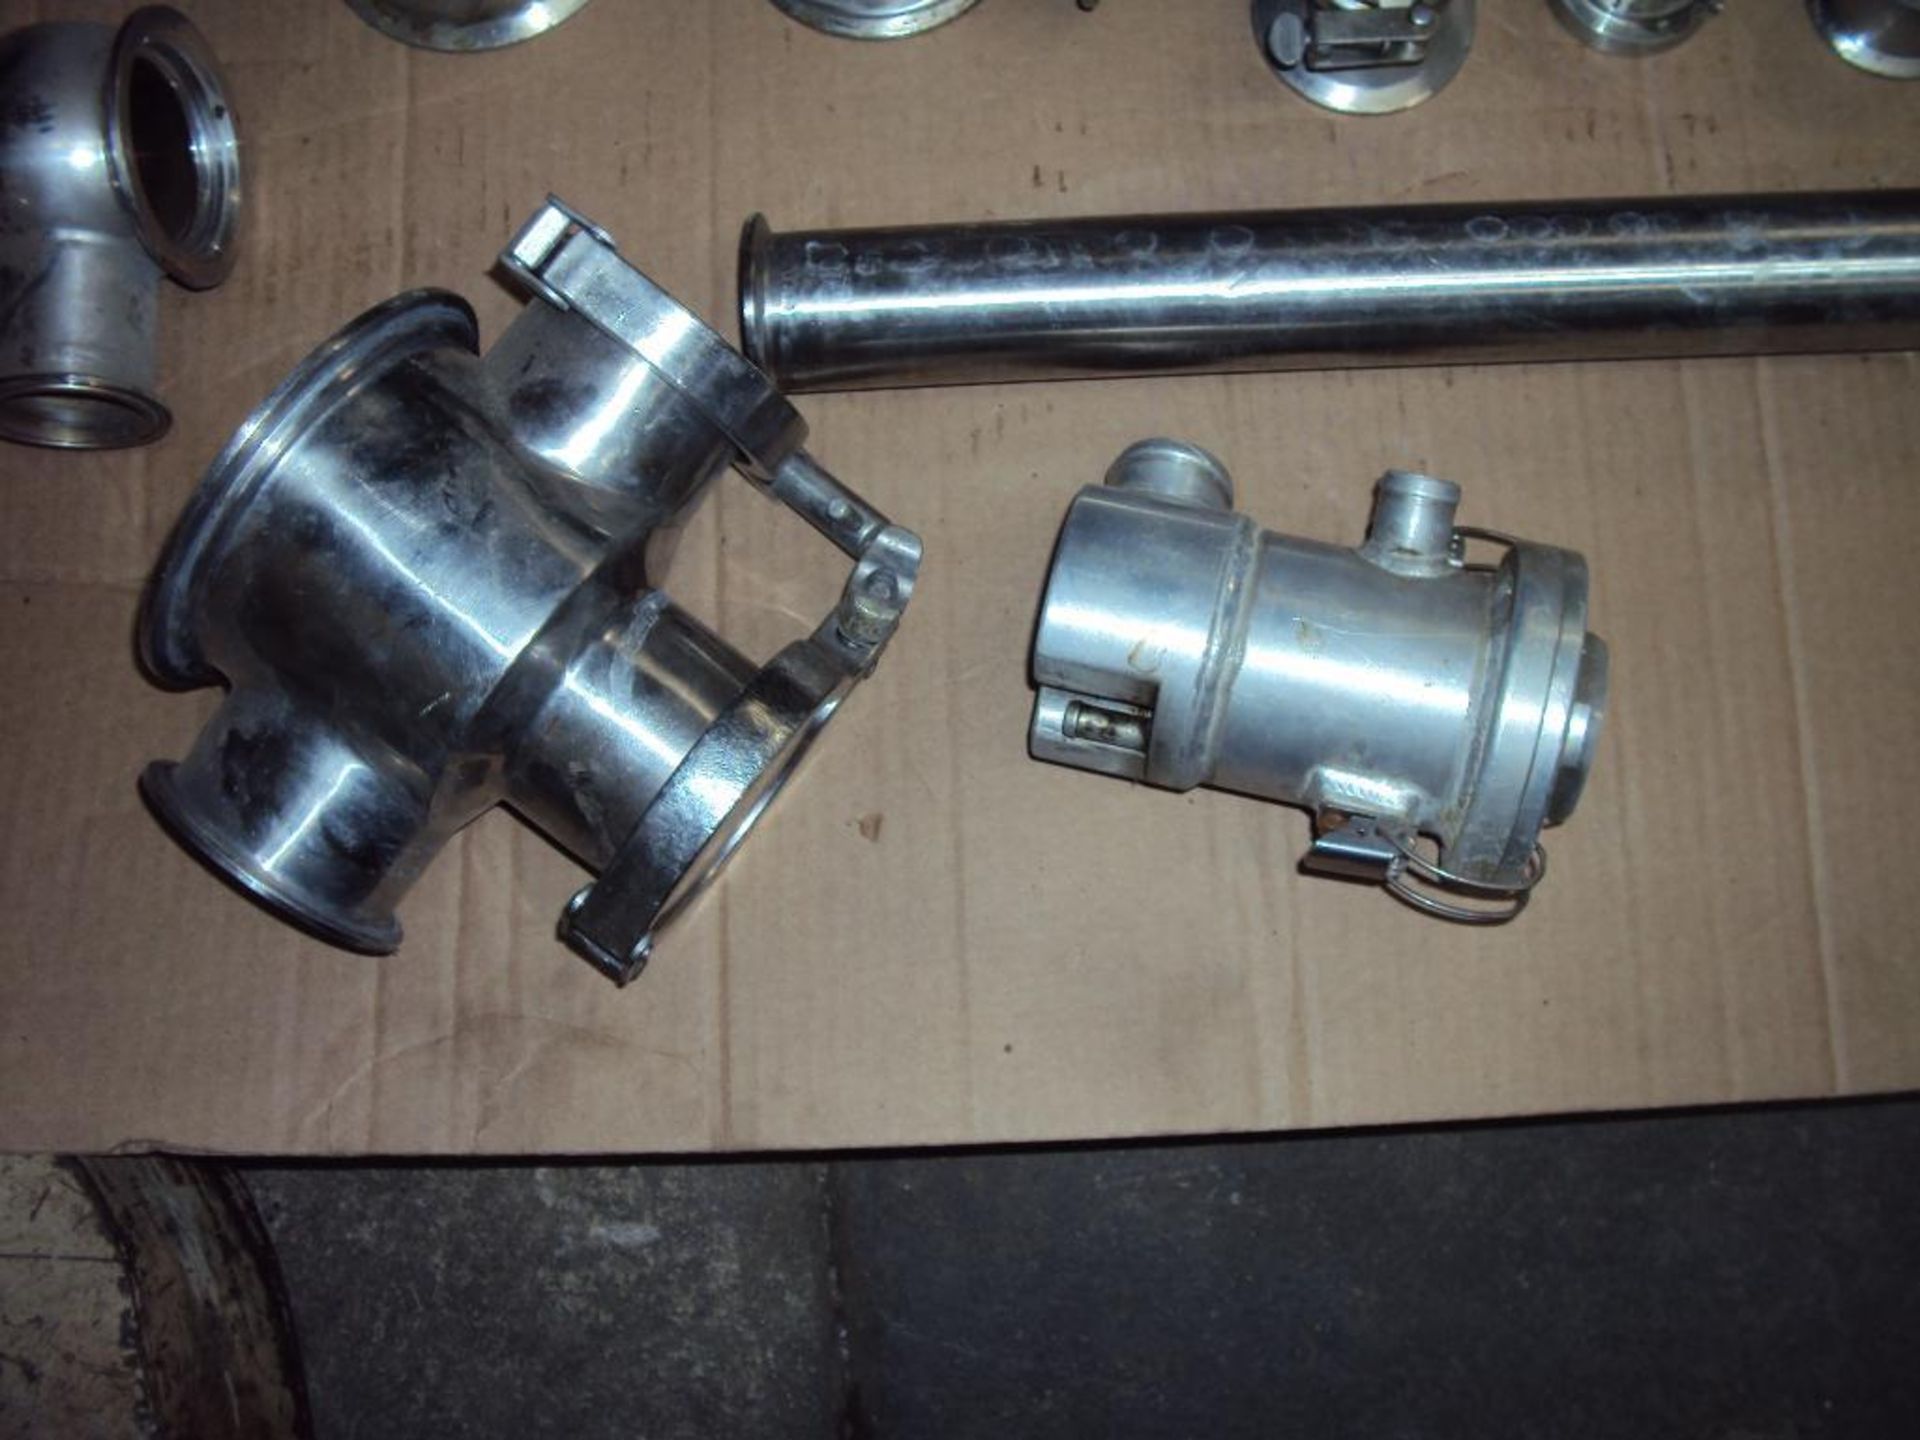 SANITARY STAINLESS STEEL PIPE AND FITTINGS IN ONE LOT - Image 3 of 6